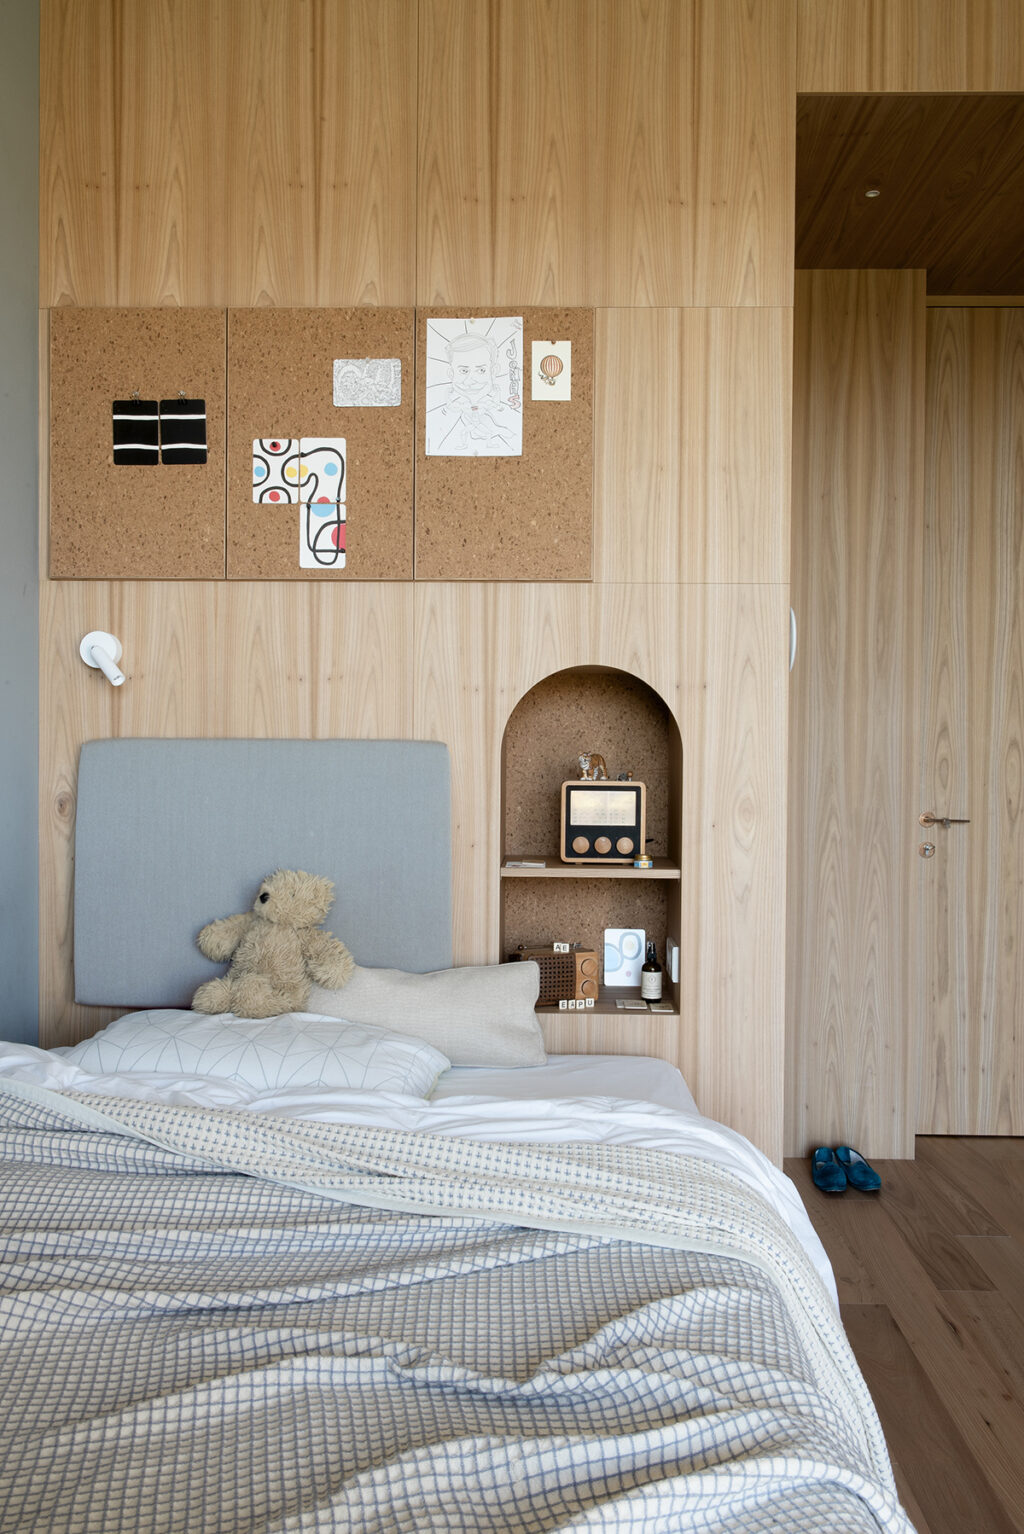 Erster Stock, Schlafzimmer ©Paolo Abate